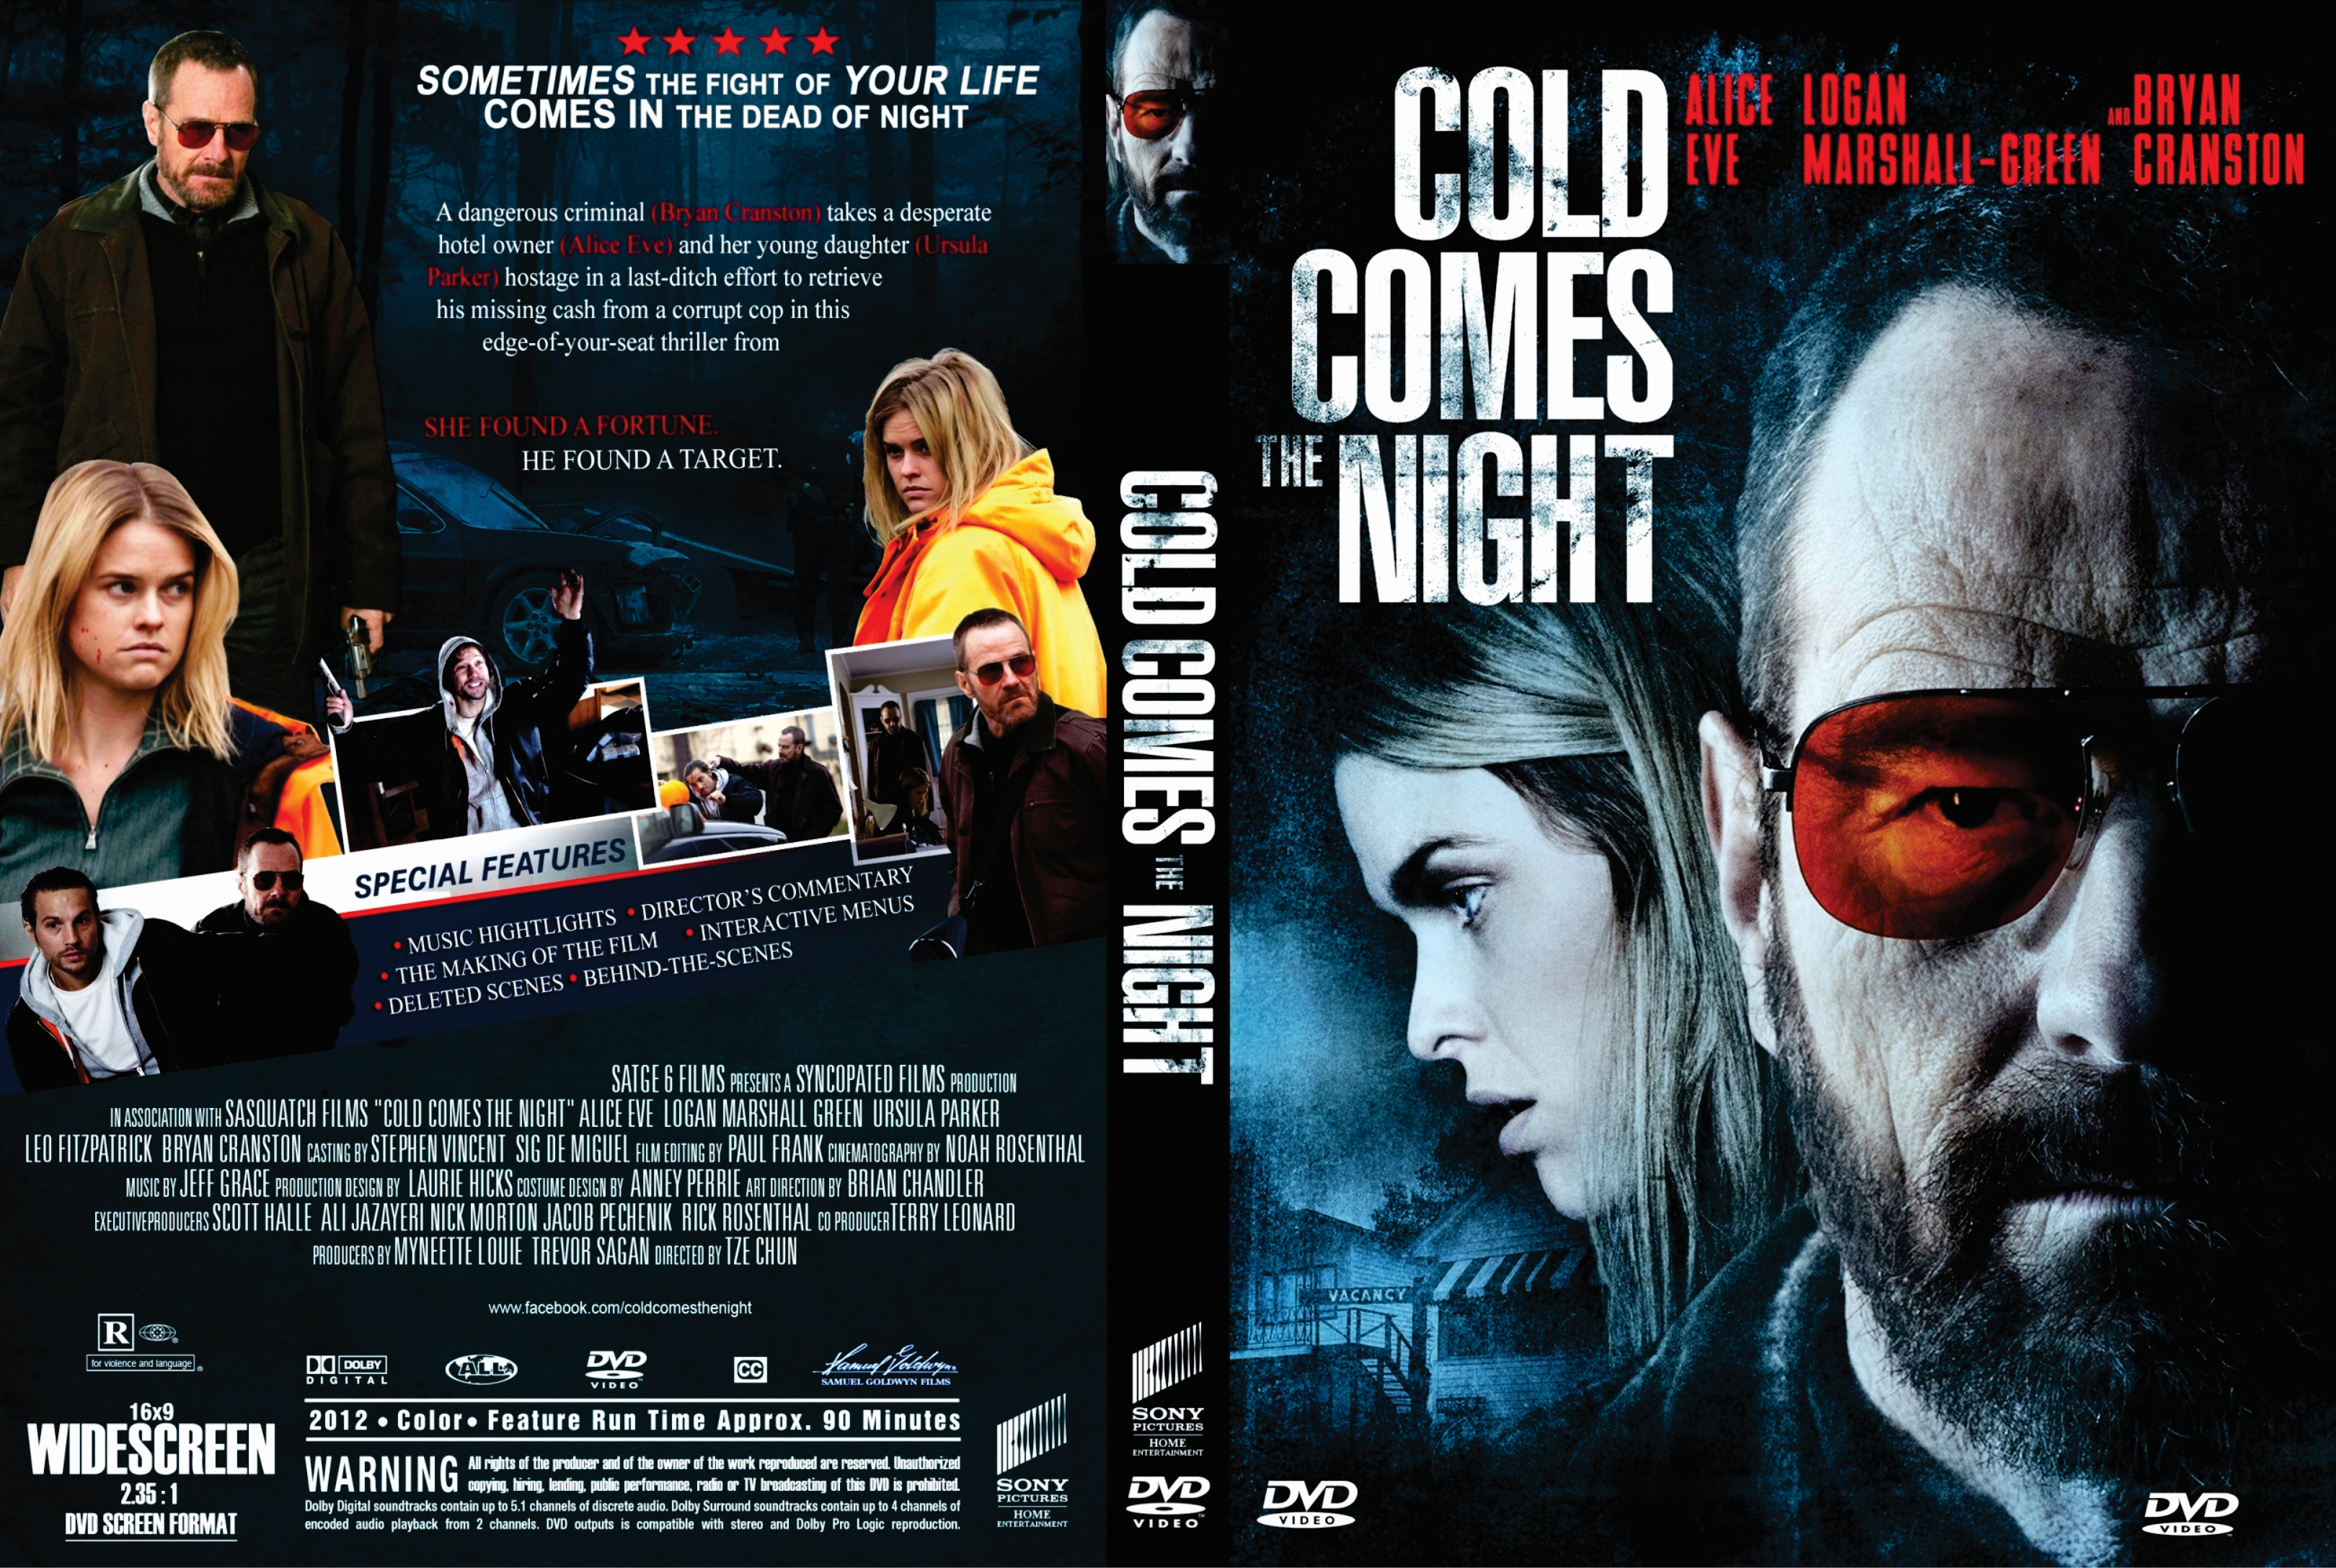 Jaquette DVD Quand Tombe la Nuit - Cold comes the night Zone 1